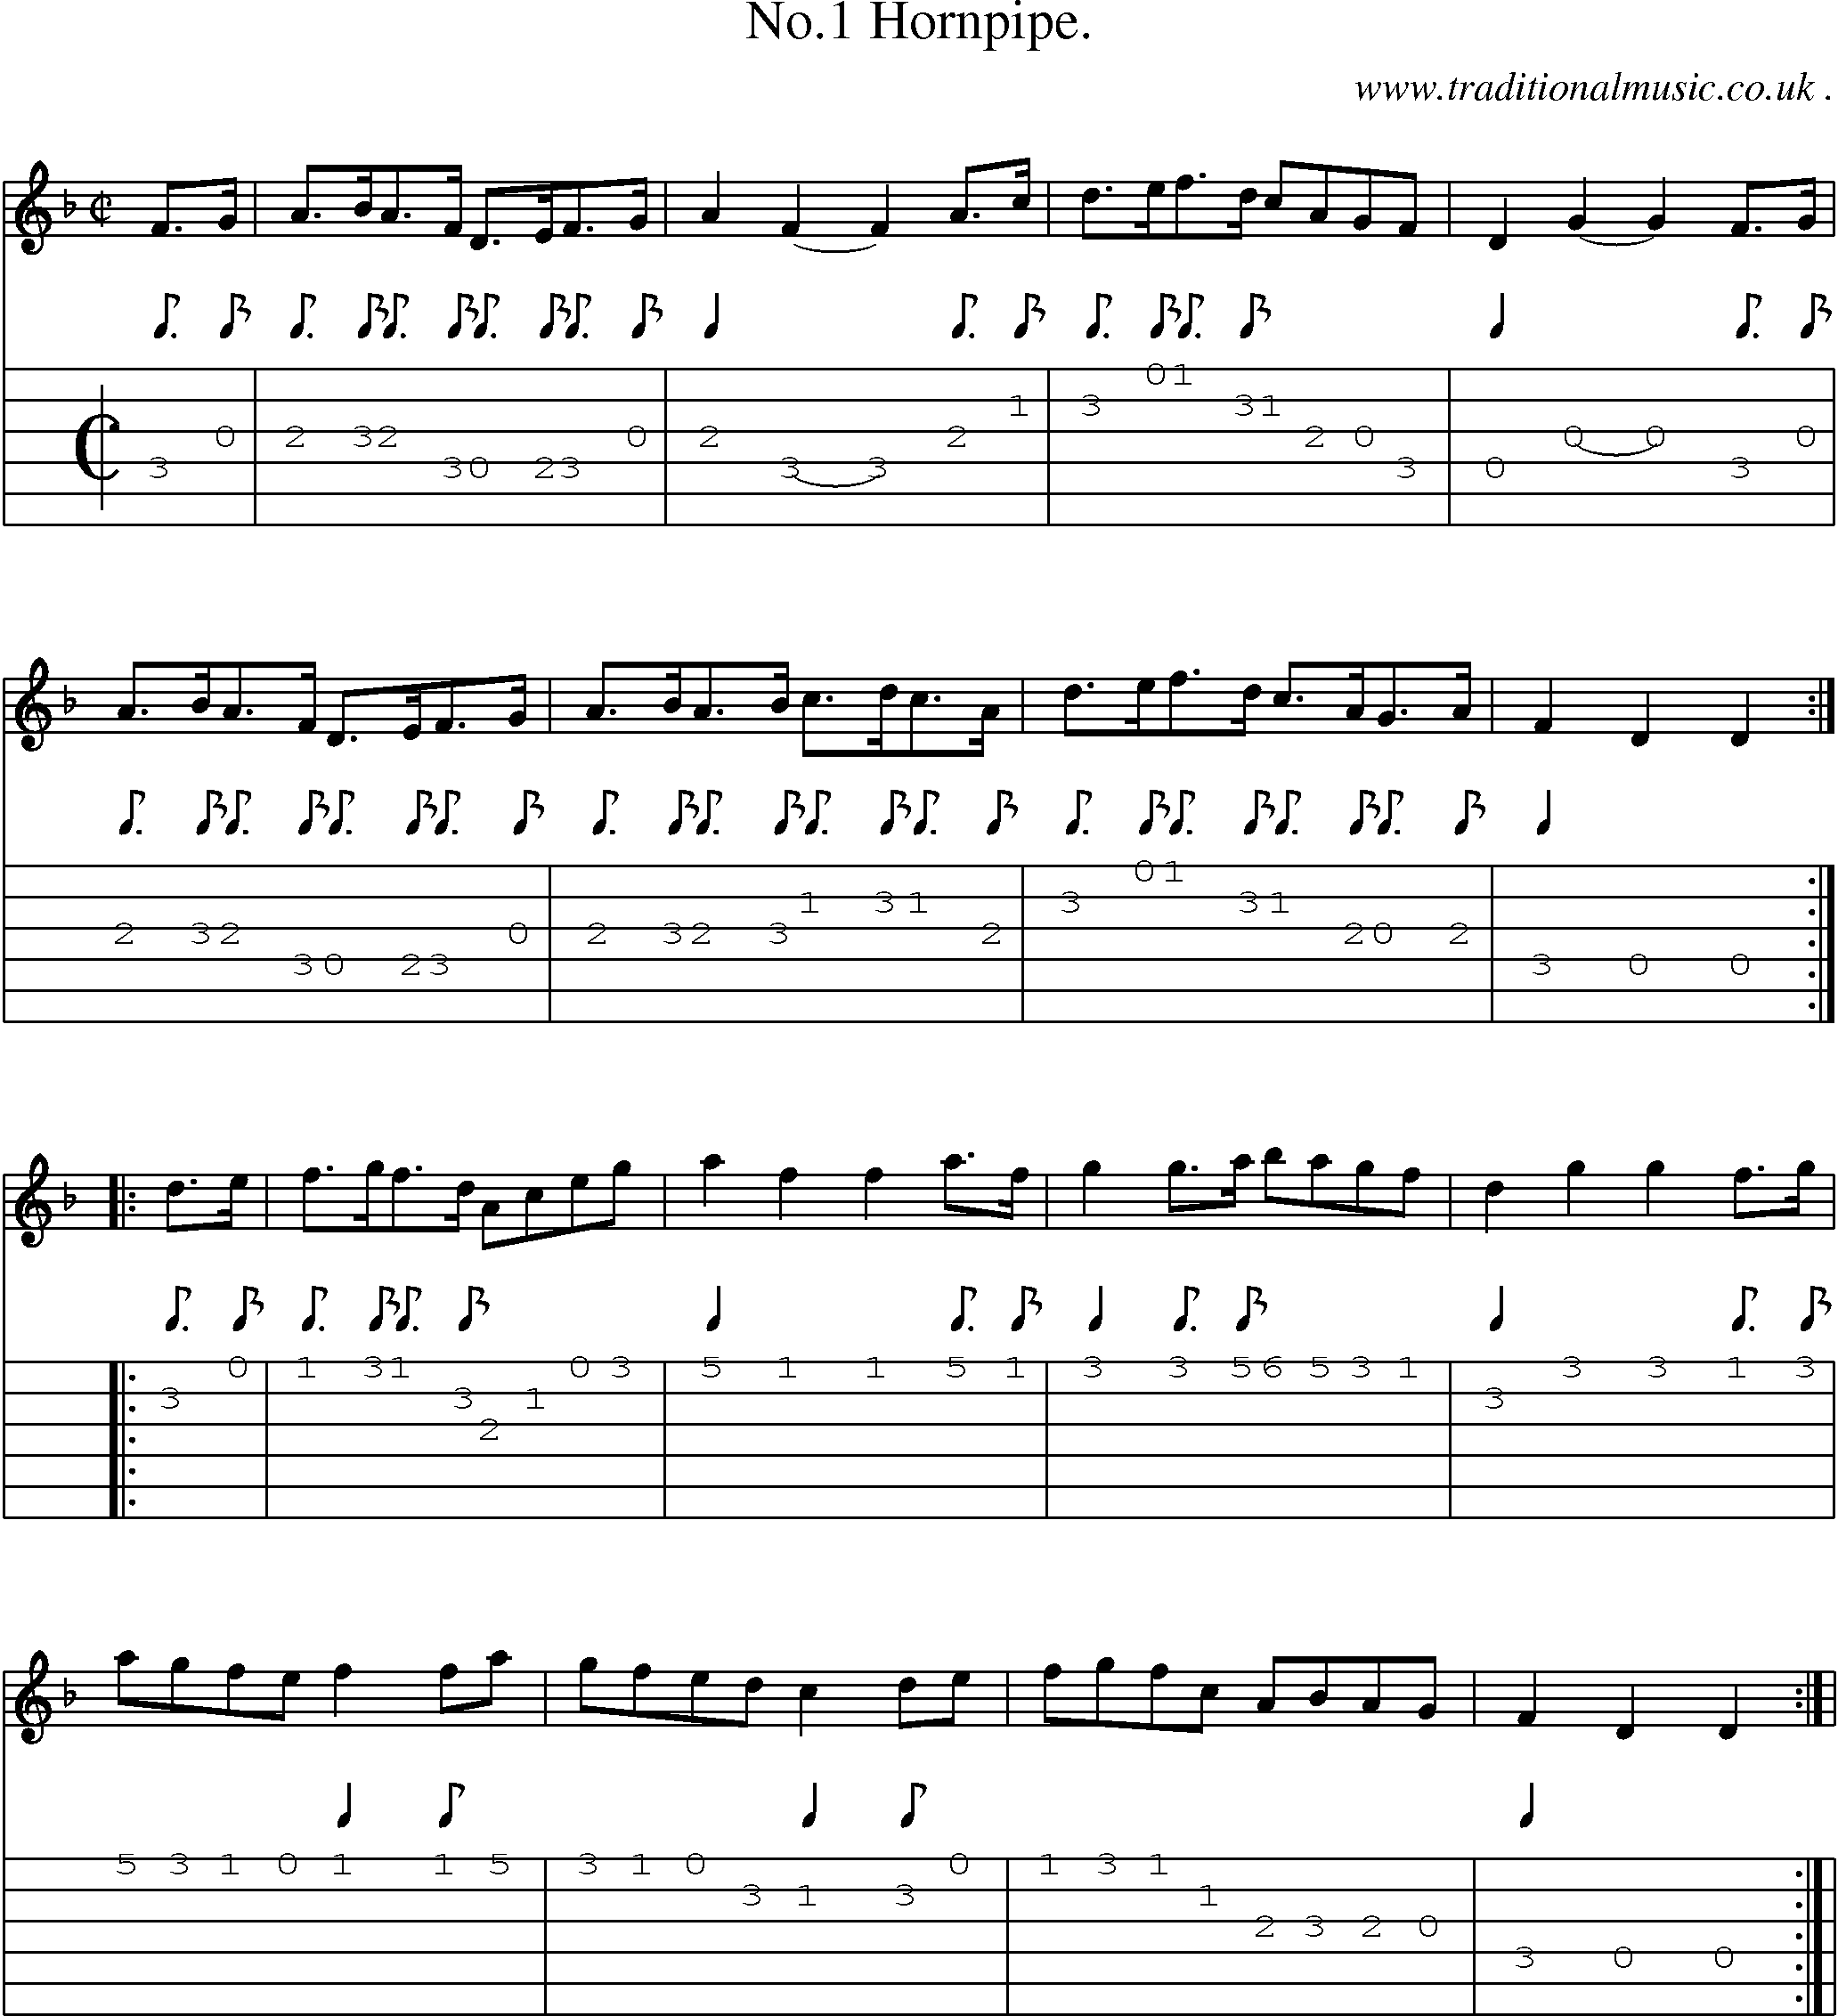 Sheet-Music and Guitar Tabs for No1 Hornpipe